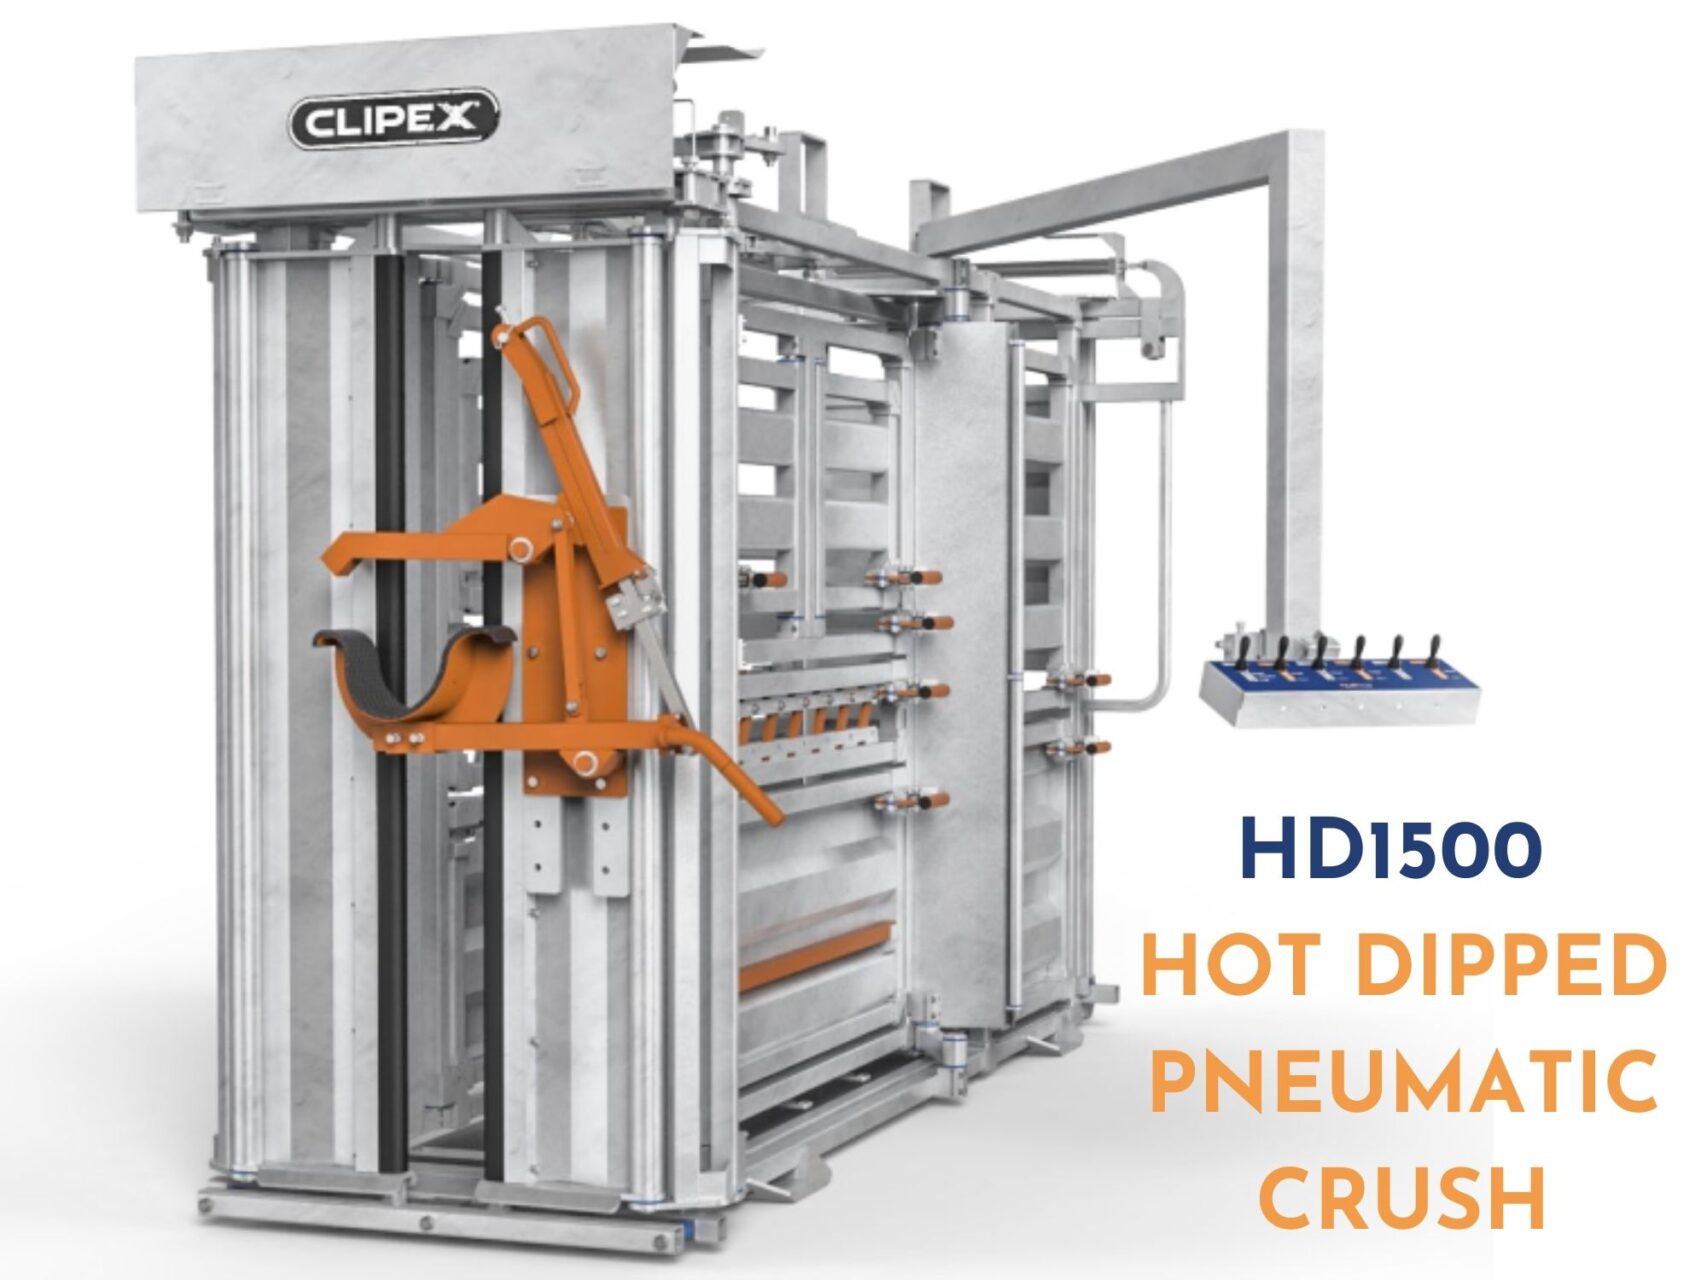 HD1500 hot dipped pneumatic cattle crush - one of many Clipex cattle crushes